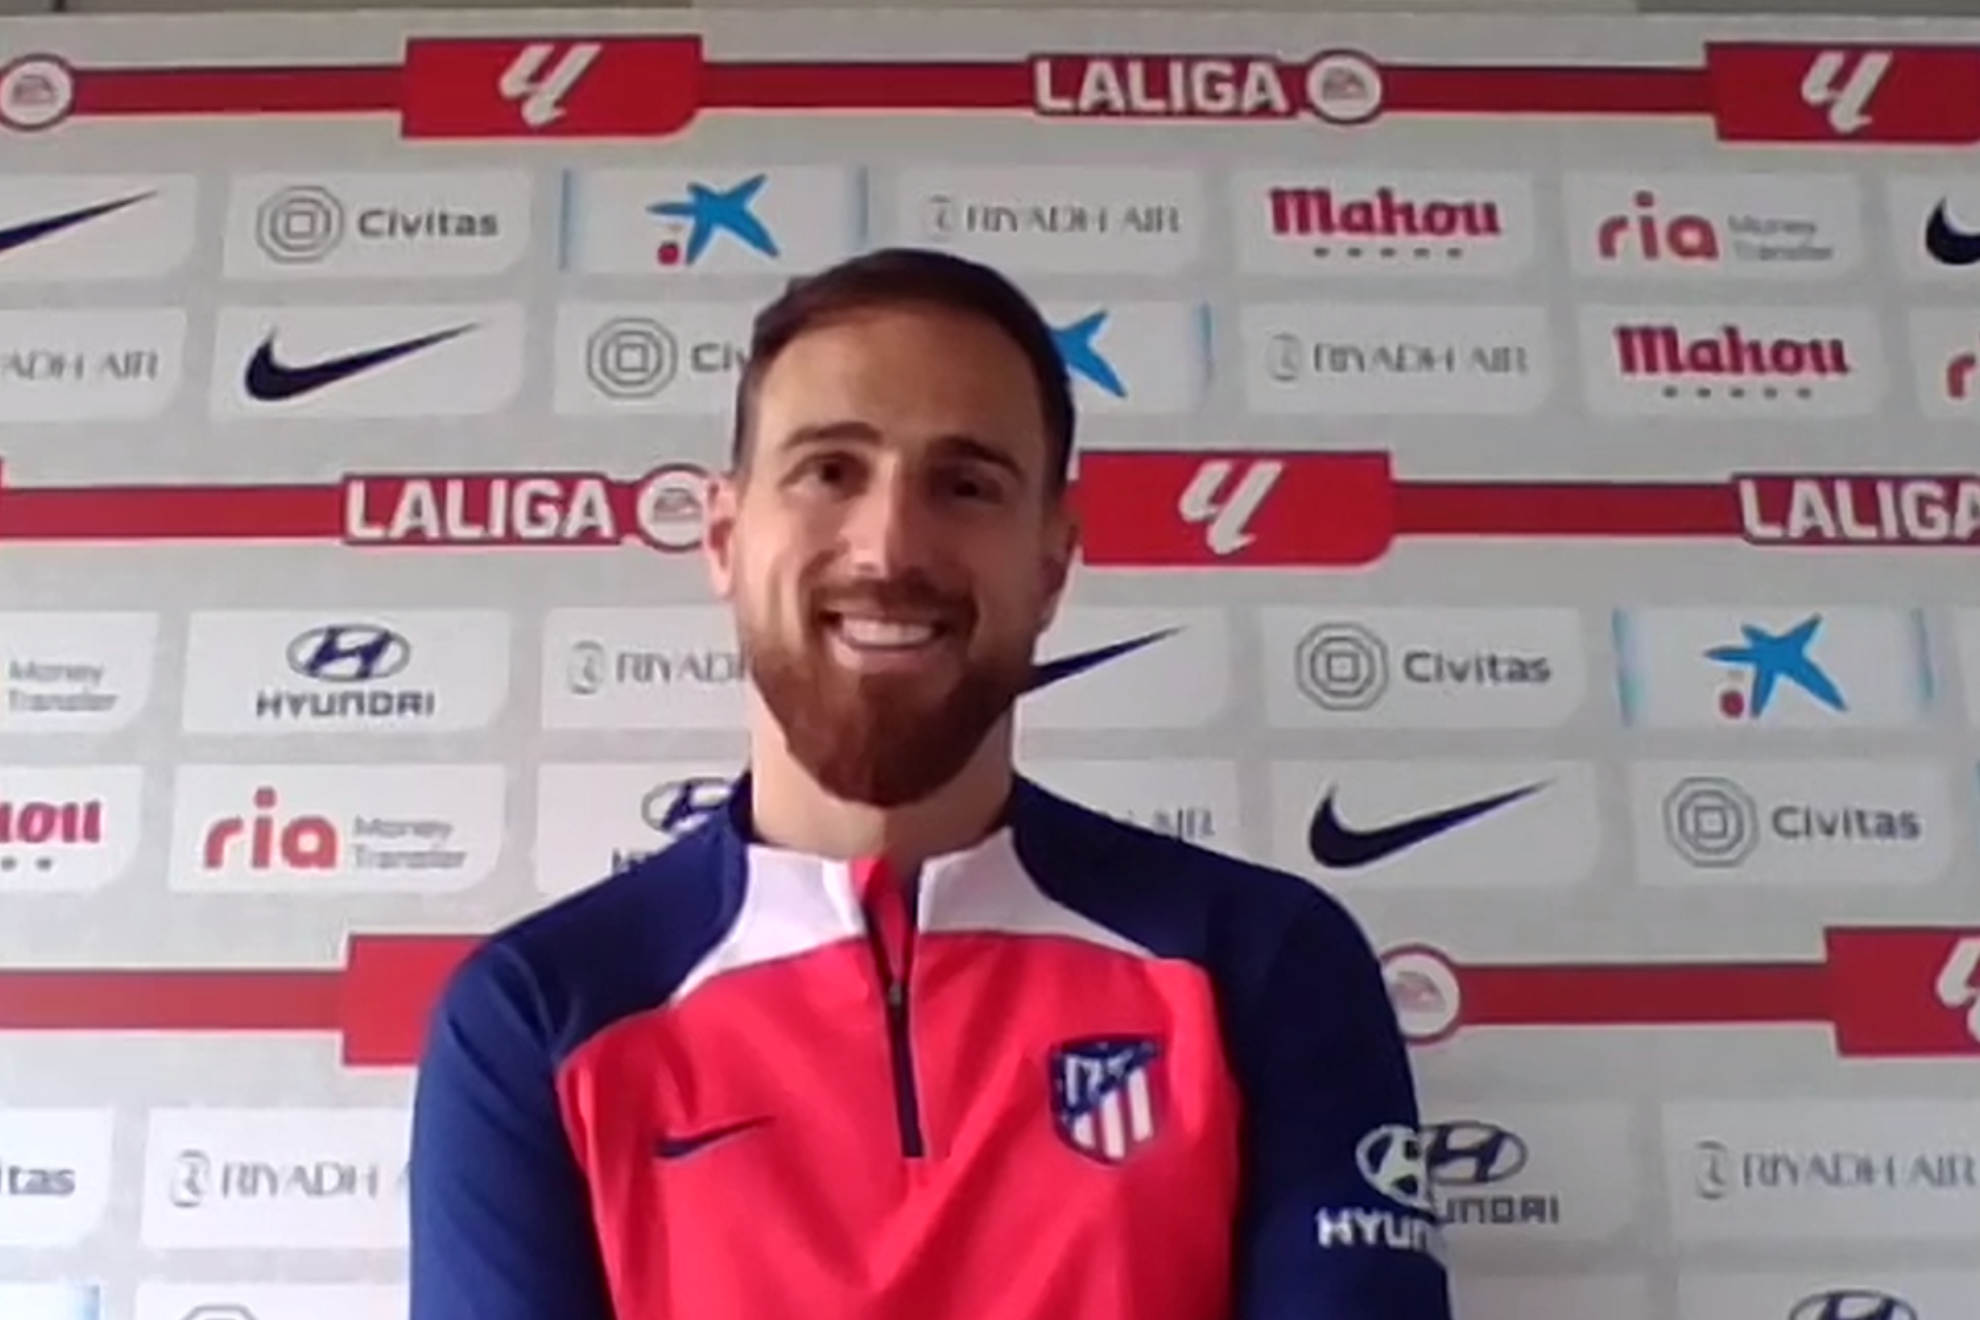 Oblak responds to a question on Thursday's Zoom call.